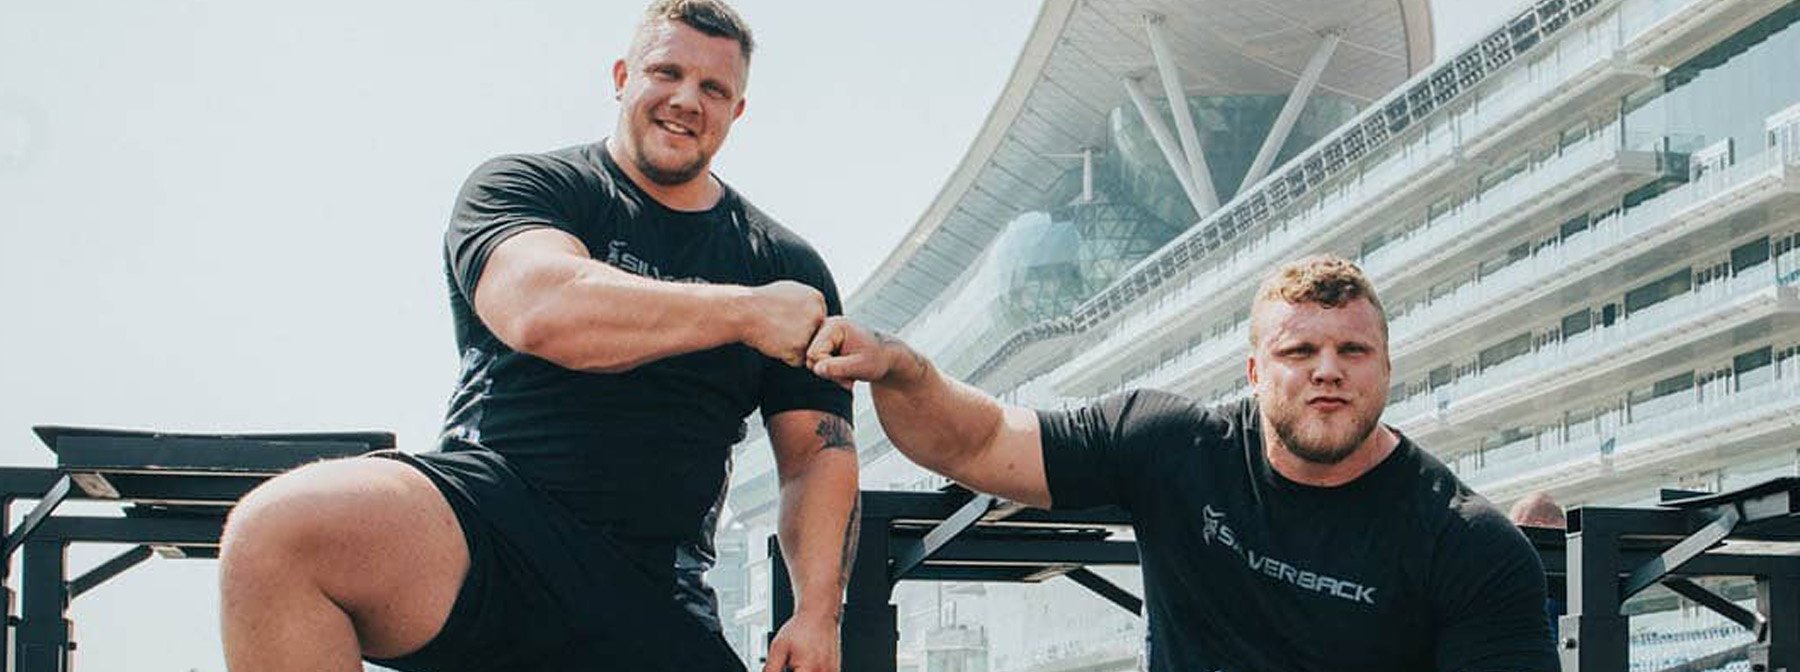 World’s Strongest Brothers Consume 10,260g Of Protein Per Month